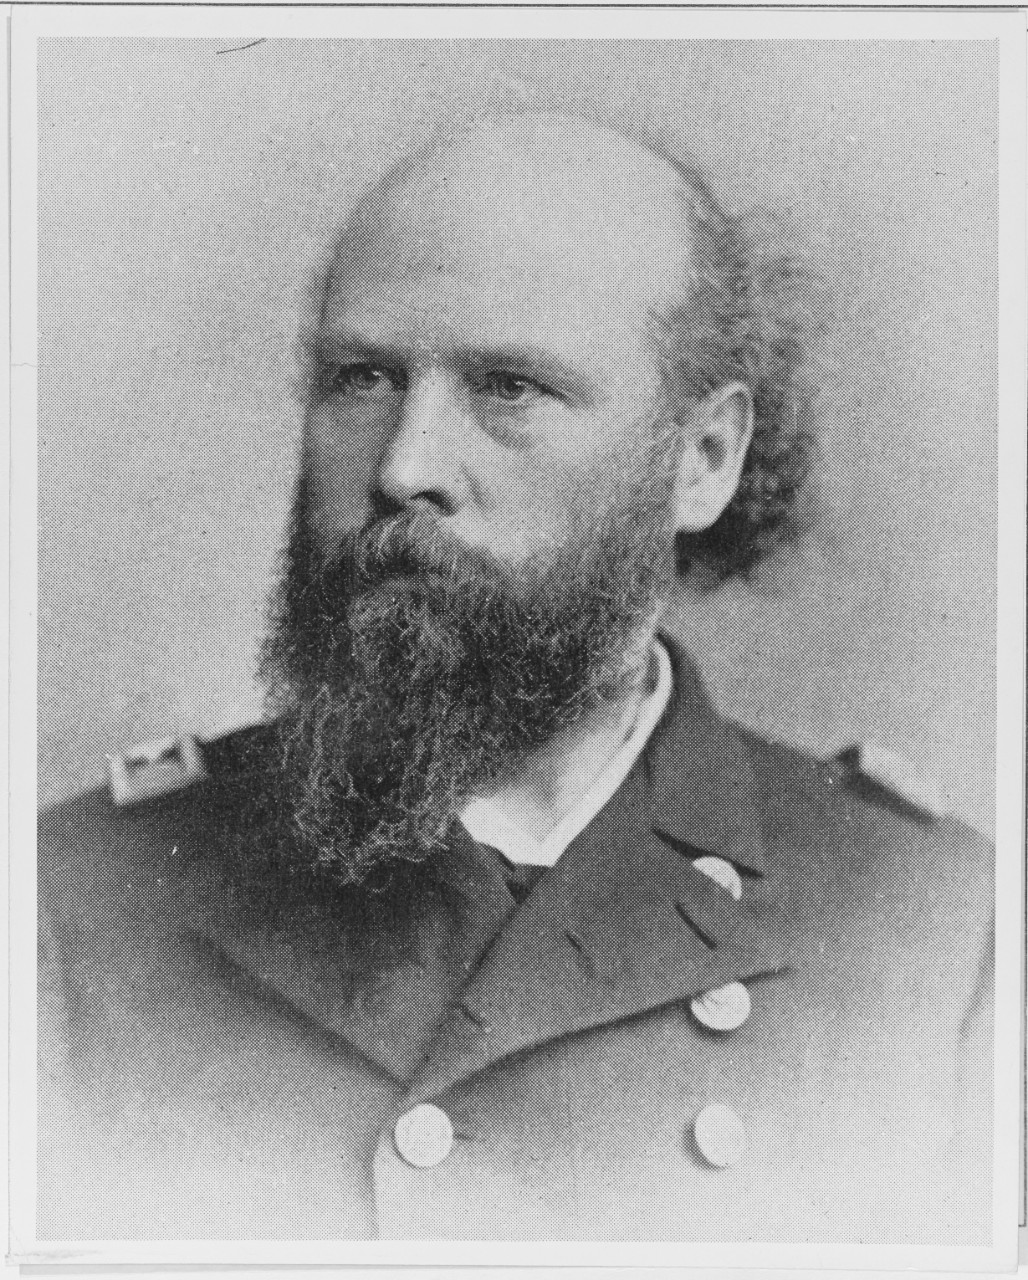 This halftone reproduction of a photograph of Melville displays his “massive frame, leonine head, and great dome-like forehead.” (Naval History and Heritage Command Photograph NH 60095)